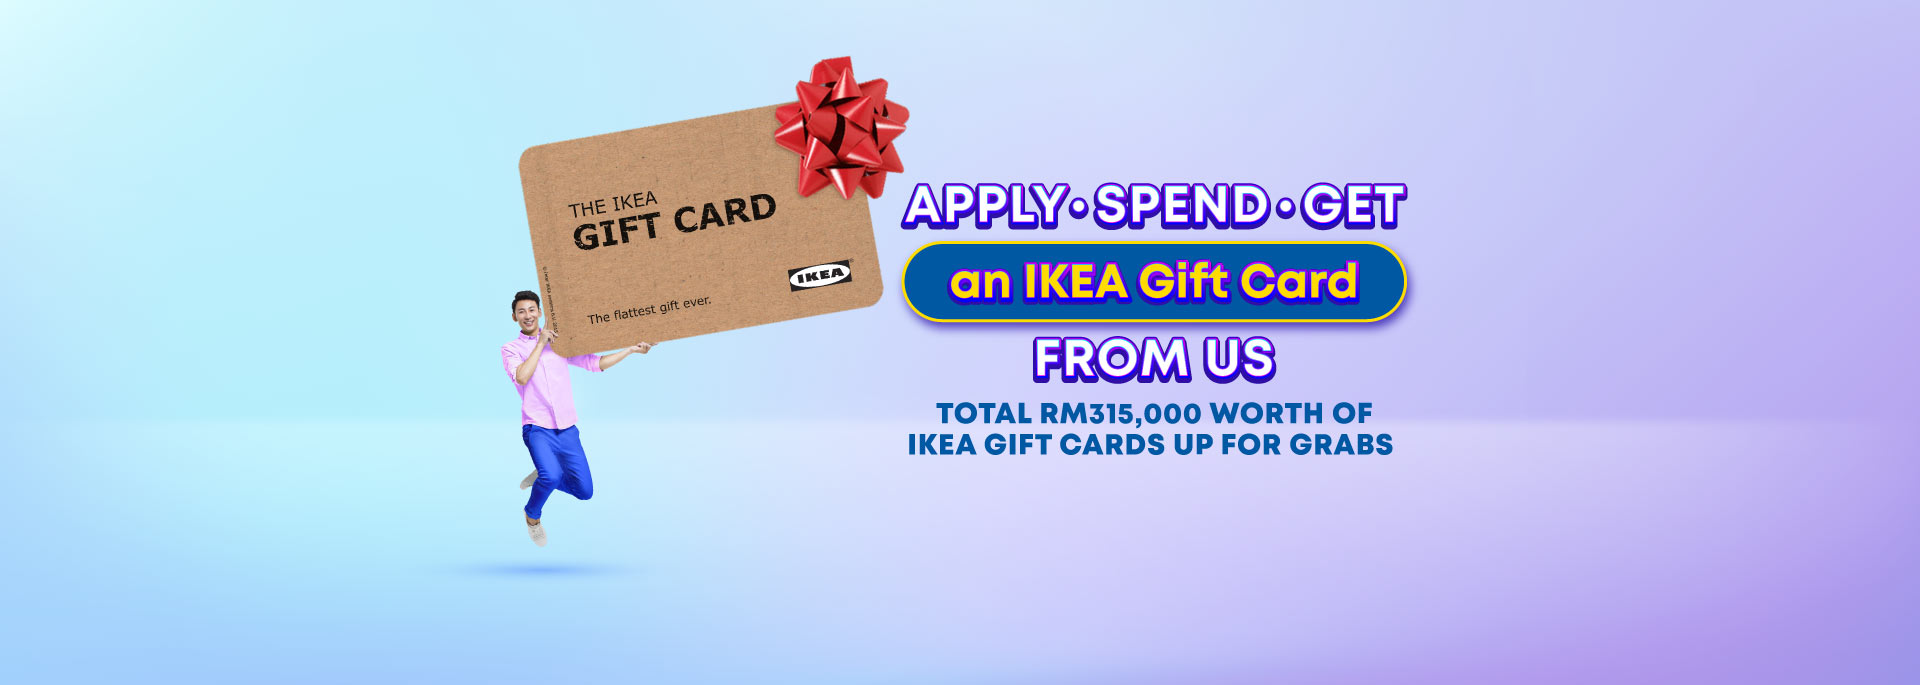 Apply, Spend and Get IKEA Gift Card from us